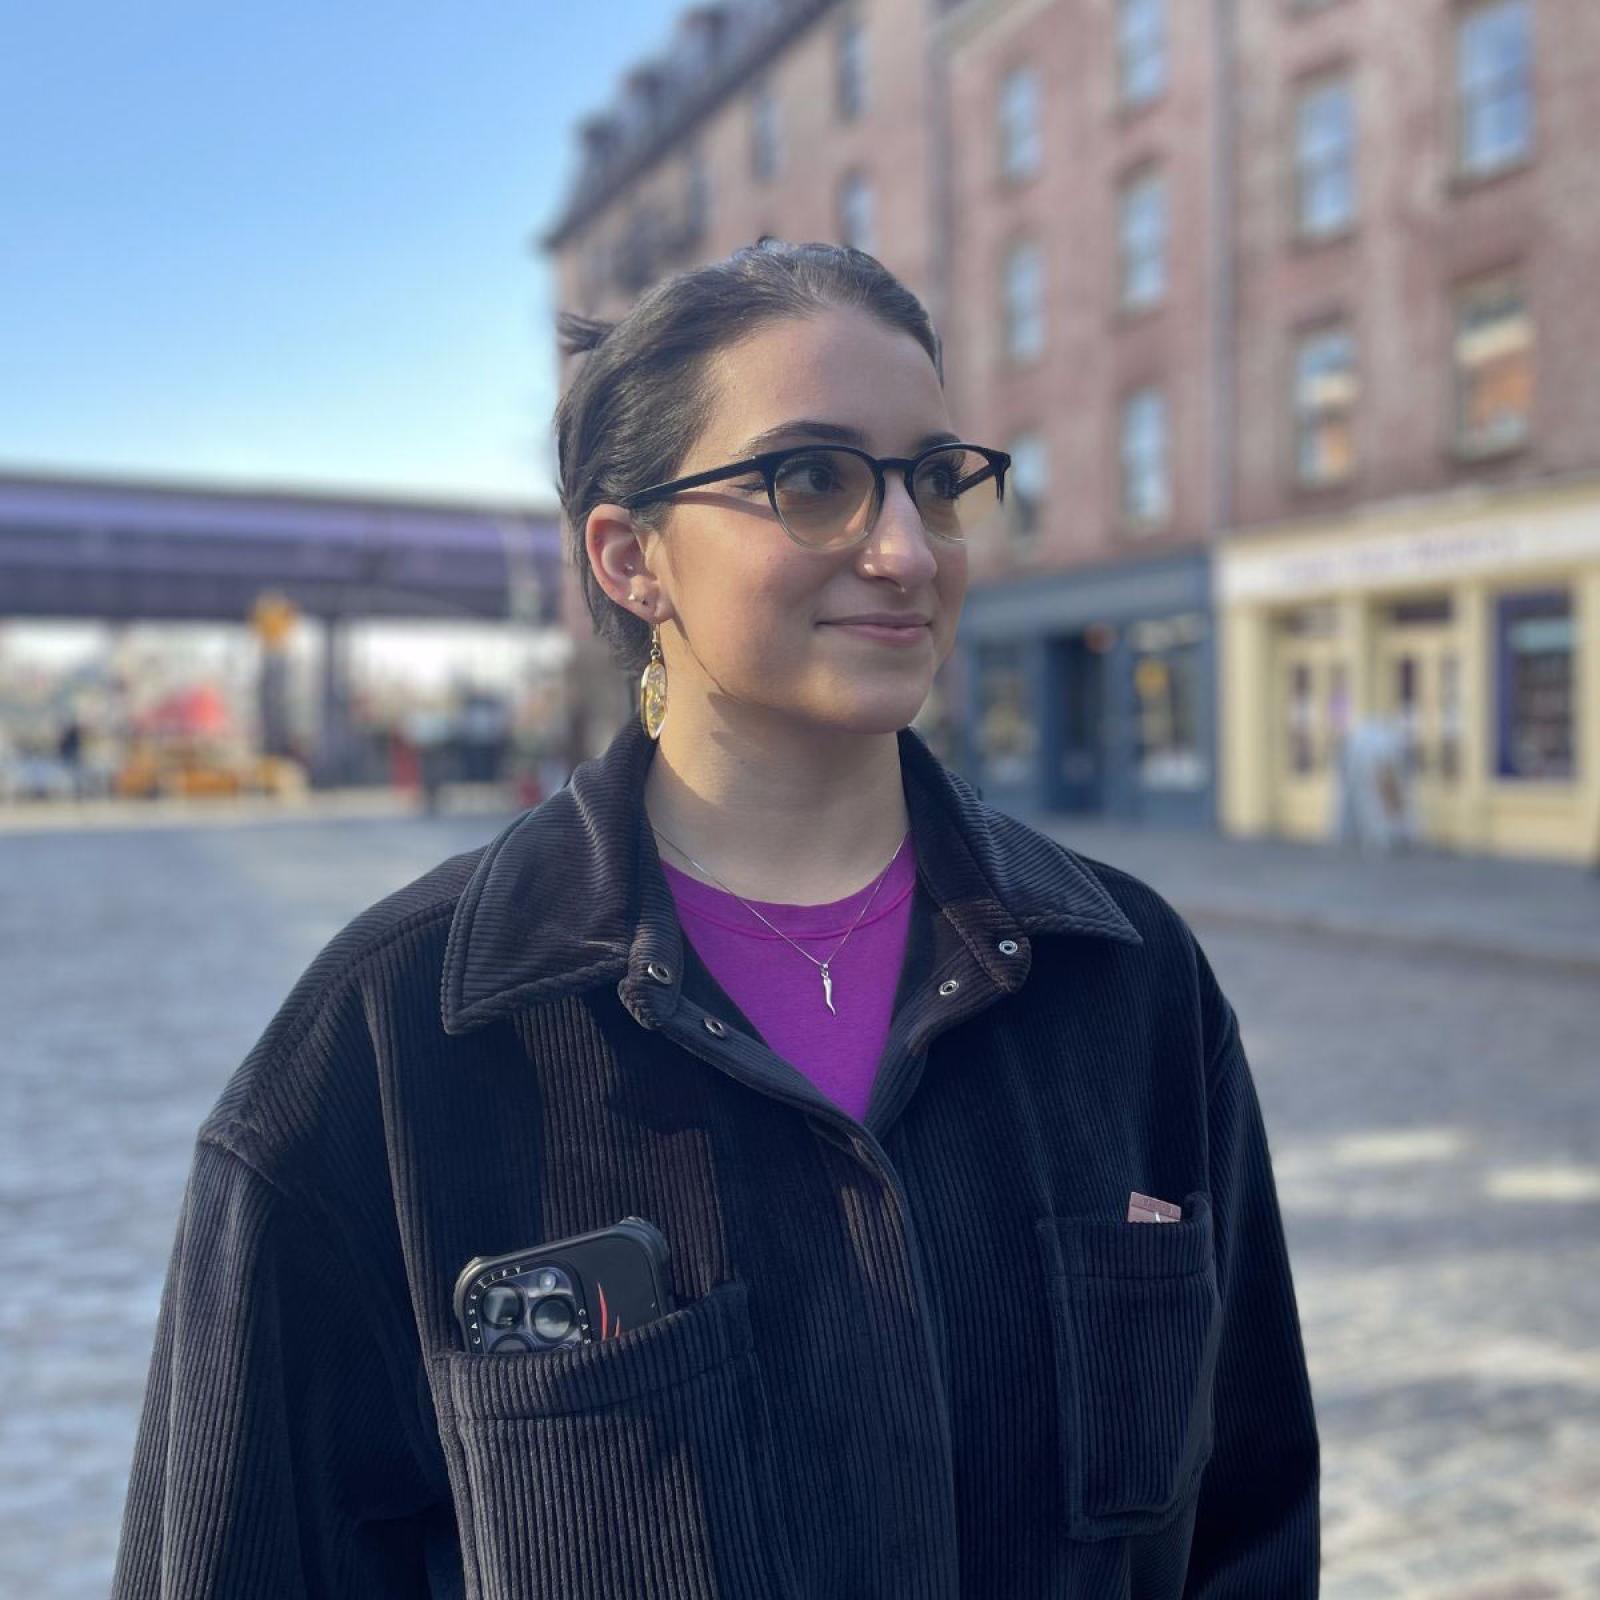 Pace Student Lauren DeMaio standing in front of old buildings in Seaport, NYC.